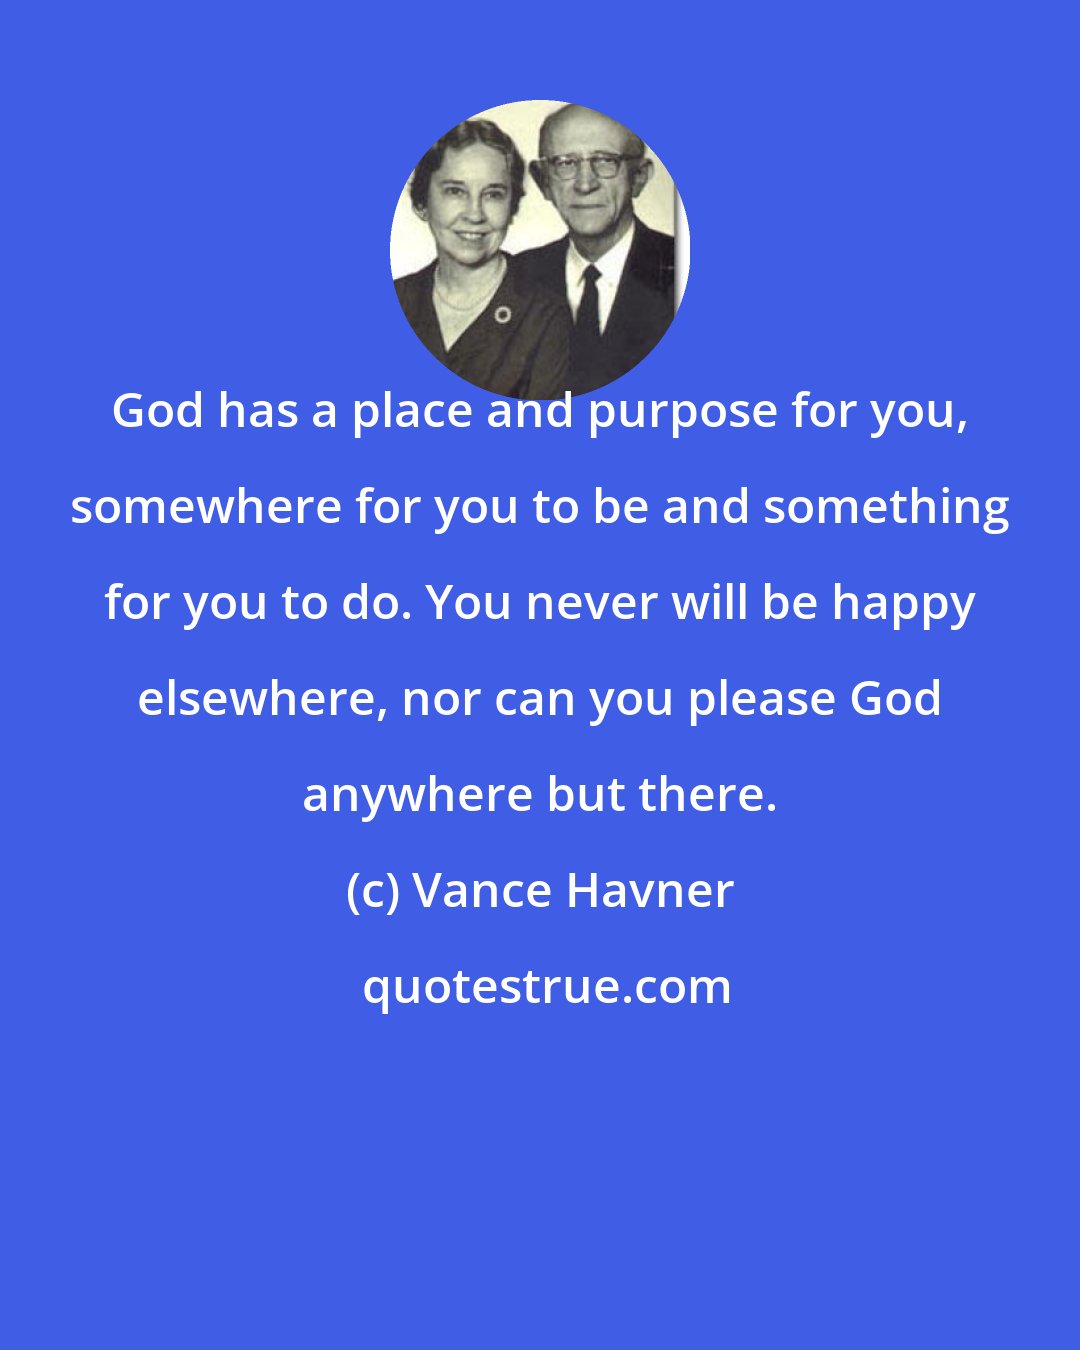 Vance Havner: God has a place and purpose for you, somewhere for you to be and something for you to do. You never will be happy elsewhere, nor can you please God anywhere but there.